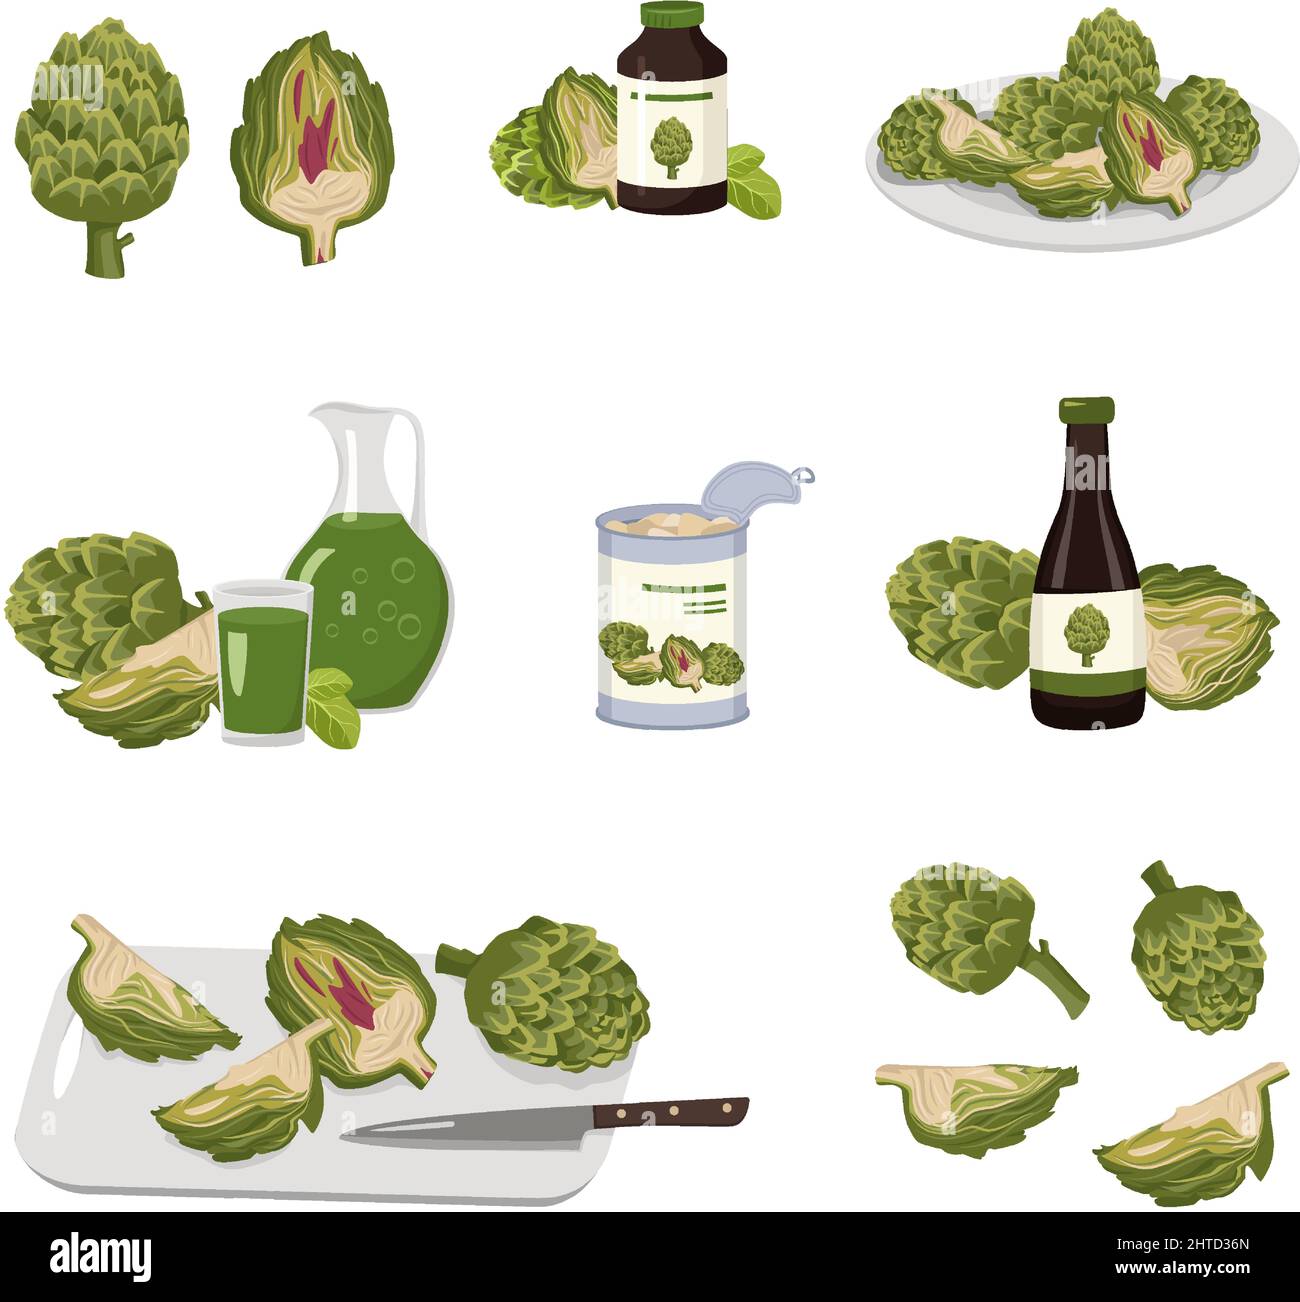 Icon set of artichoke and products from its. Whole vegetable and halves with leaves, healthy juice and medicine from plant, canned food in jar, sliced product on board and plate. Vector flat illustration Stock Vector